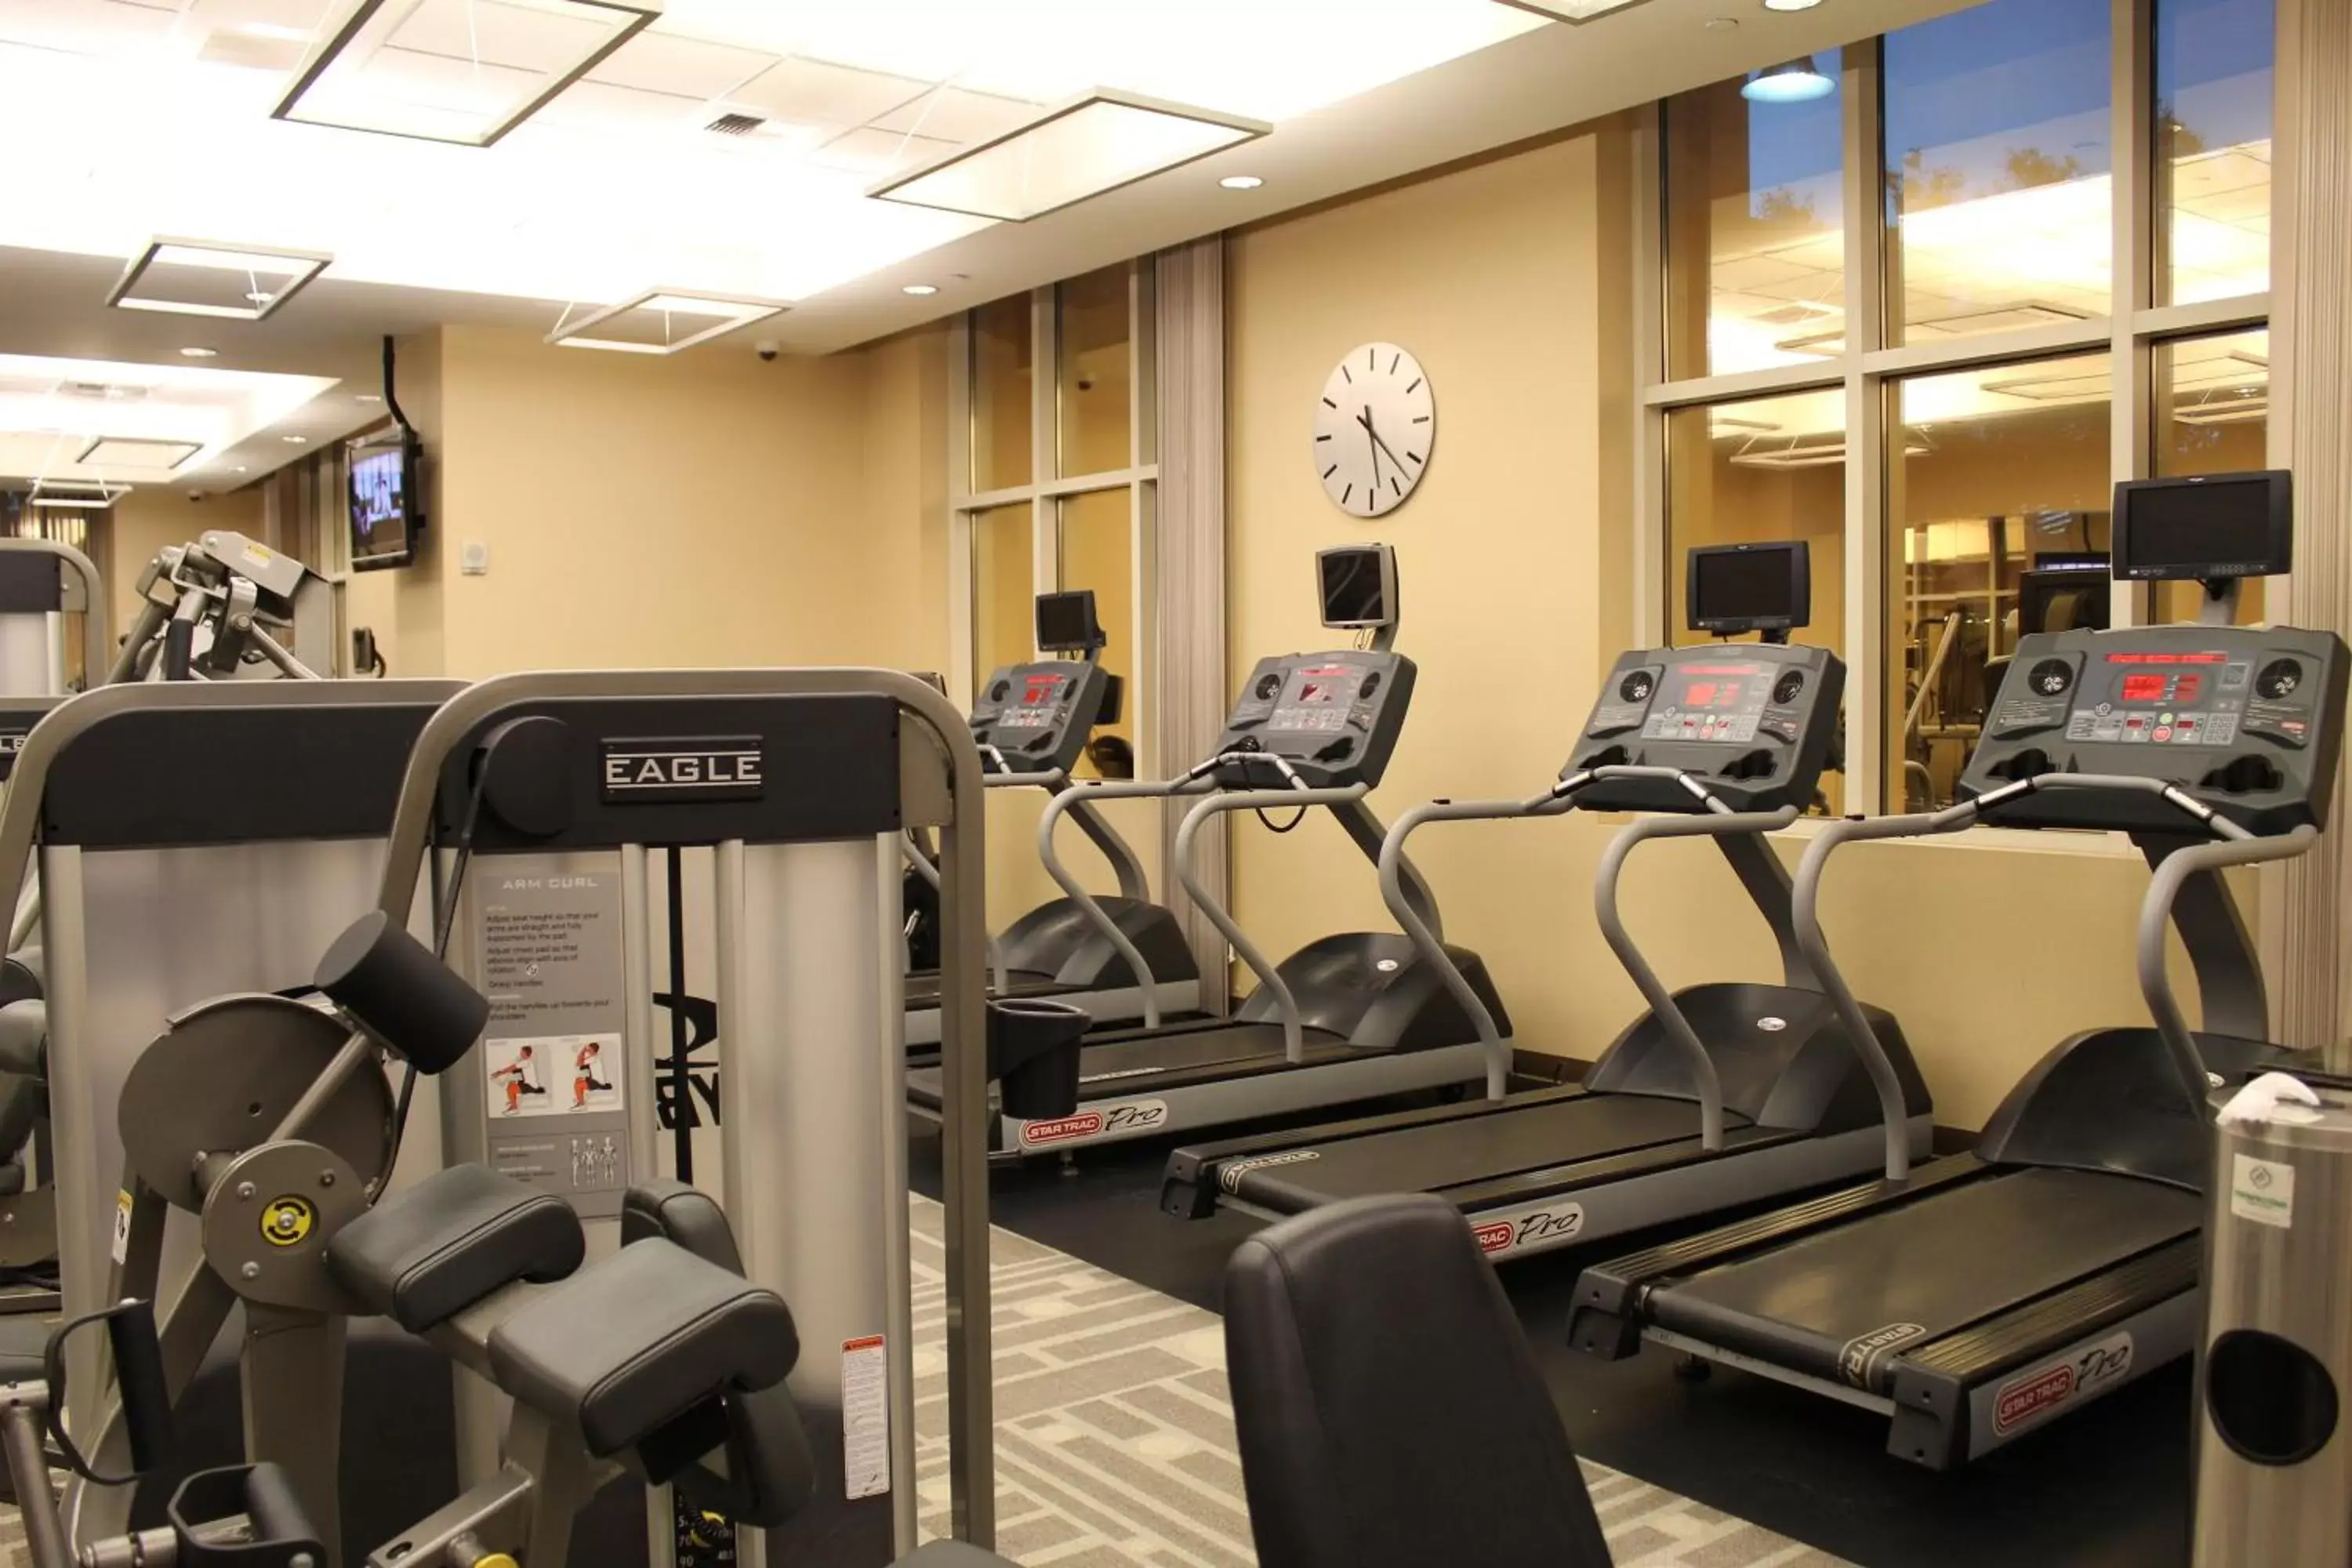 Fitness centre/facilities, Fitness Center/Facilities in Luxury Suites International at The Signature